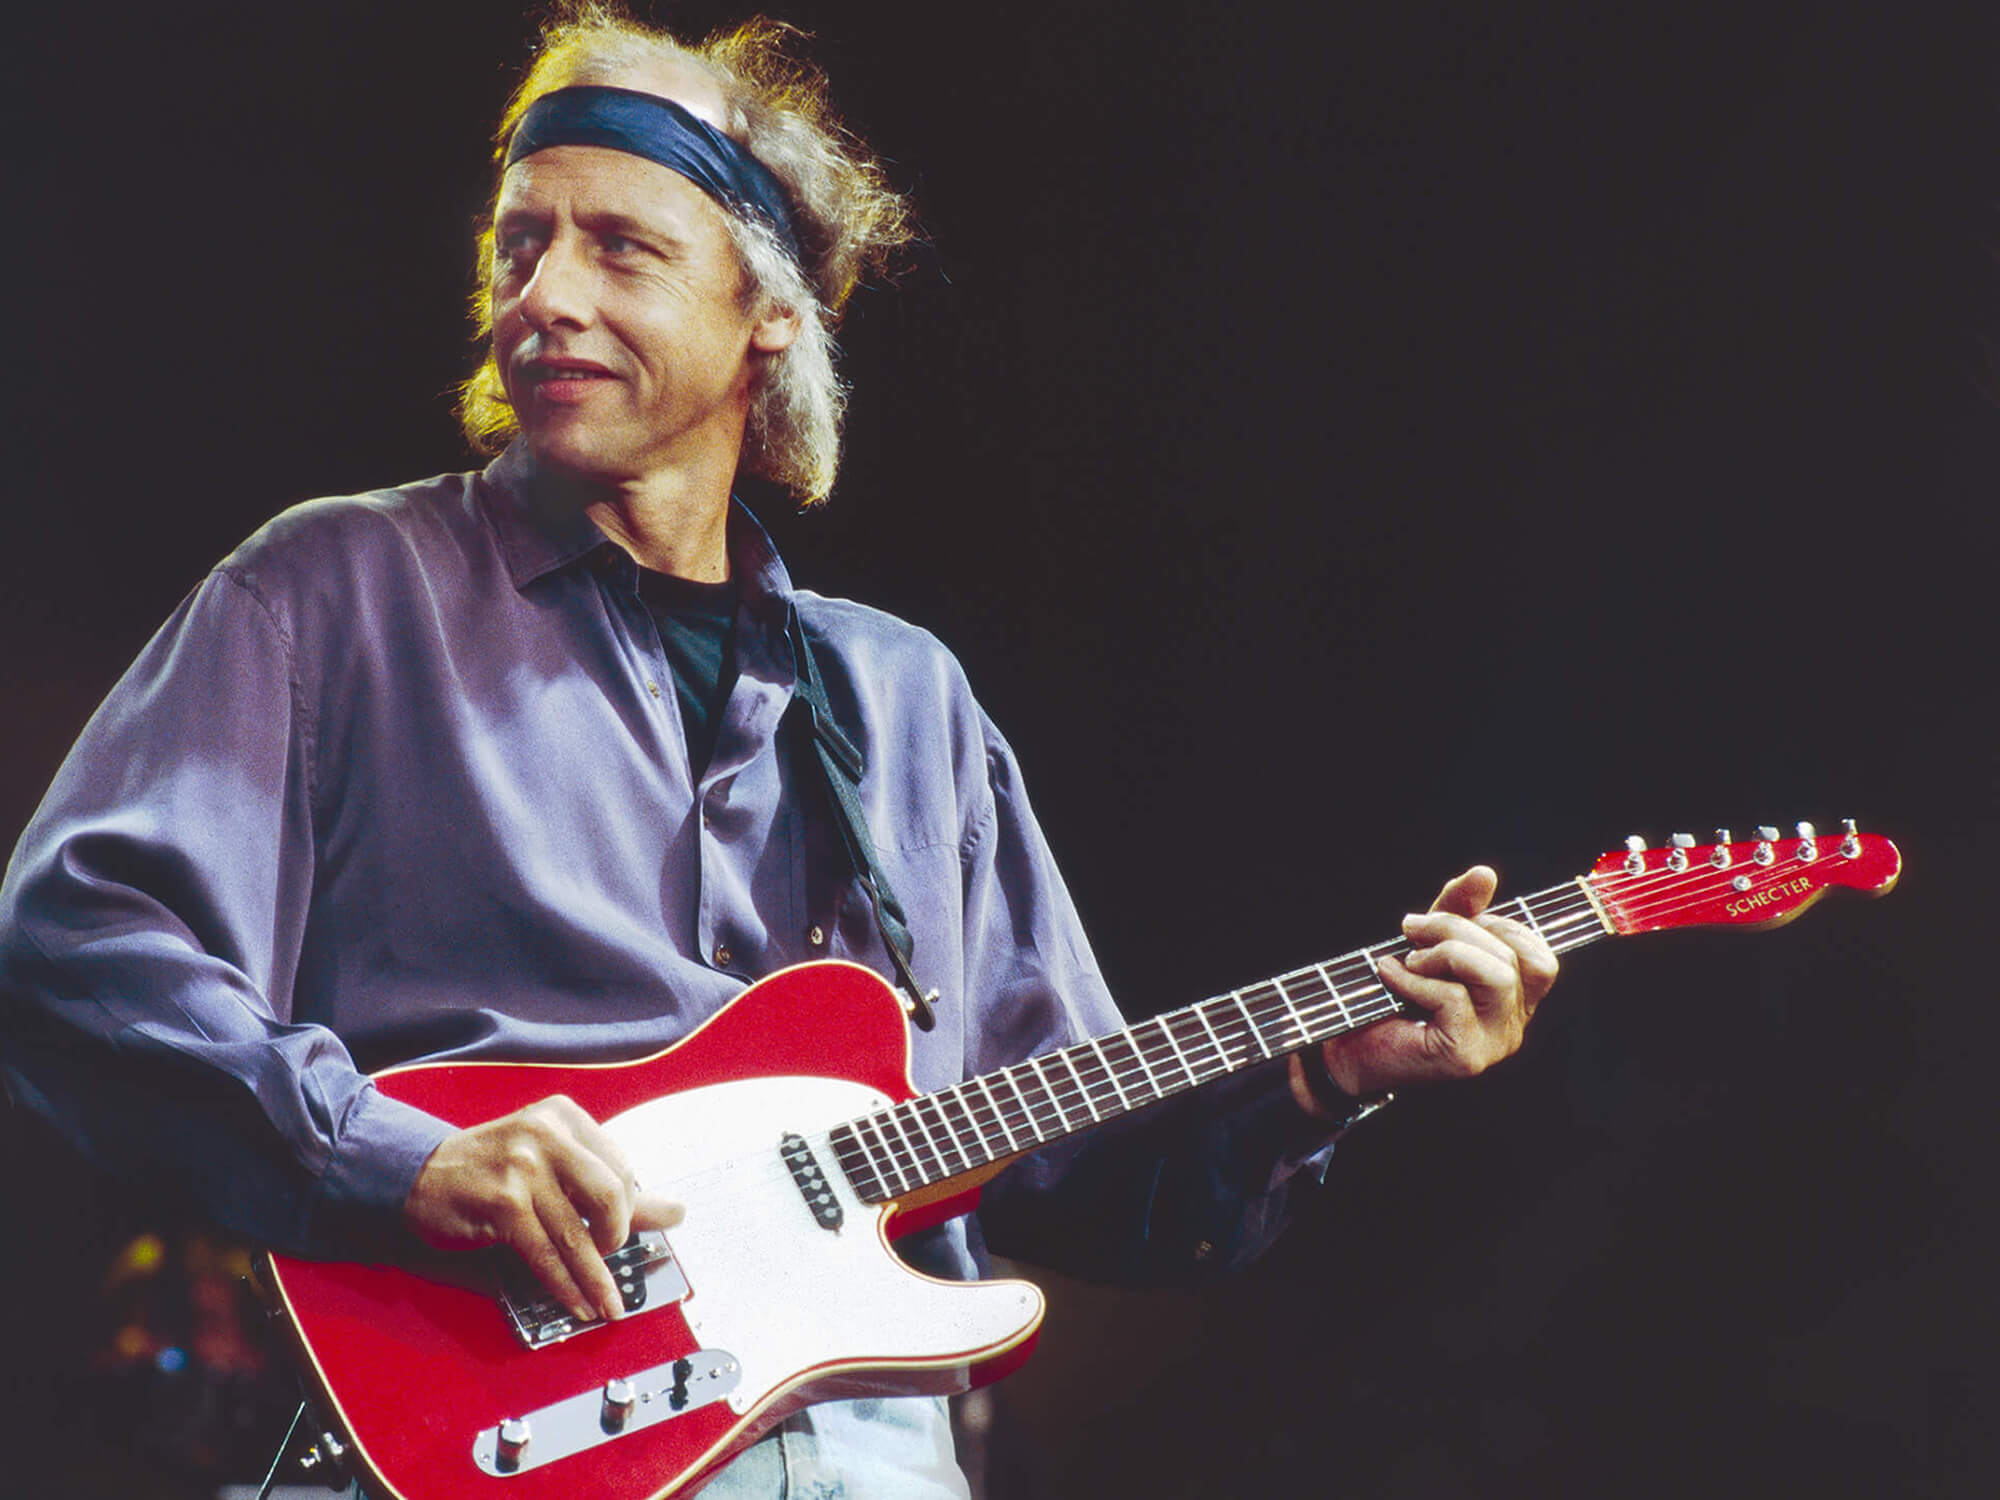 Mark Knopfler of Dire Straits playing a Schecter guitar in 1991 by Phil Dent/Redferns via Getty Images